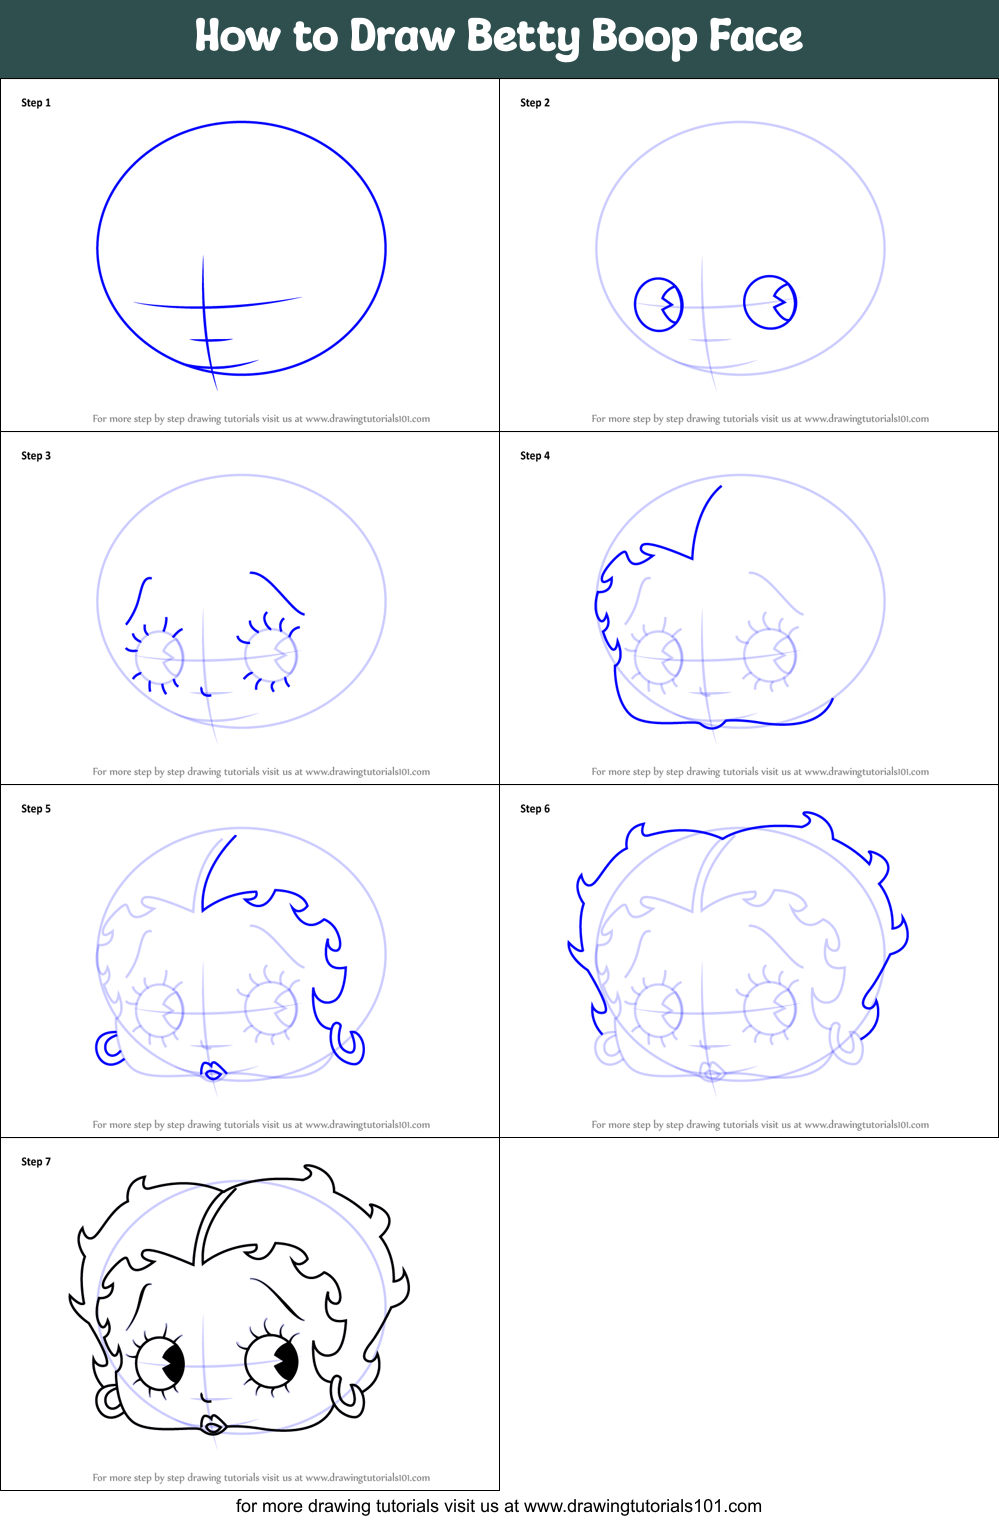 How to Draw Betty Boop Face printable step by step drawing sheet